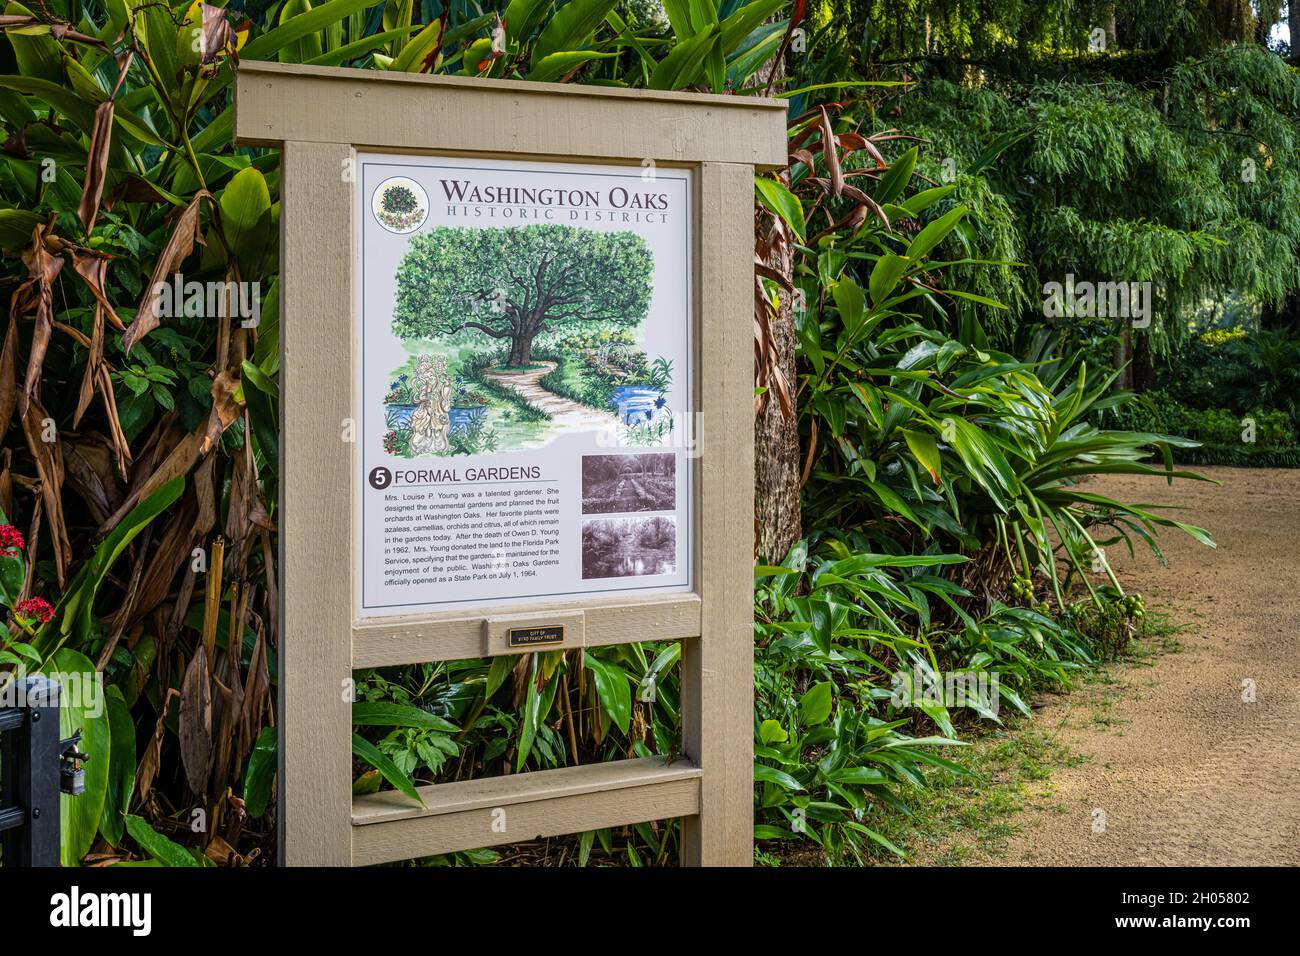 Signage for the Formal Gardens area of the Washington Oaks Historic District in Washington Oaks Gardens State Park in Palm Coast, Florida. (USA) Stock Photo